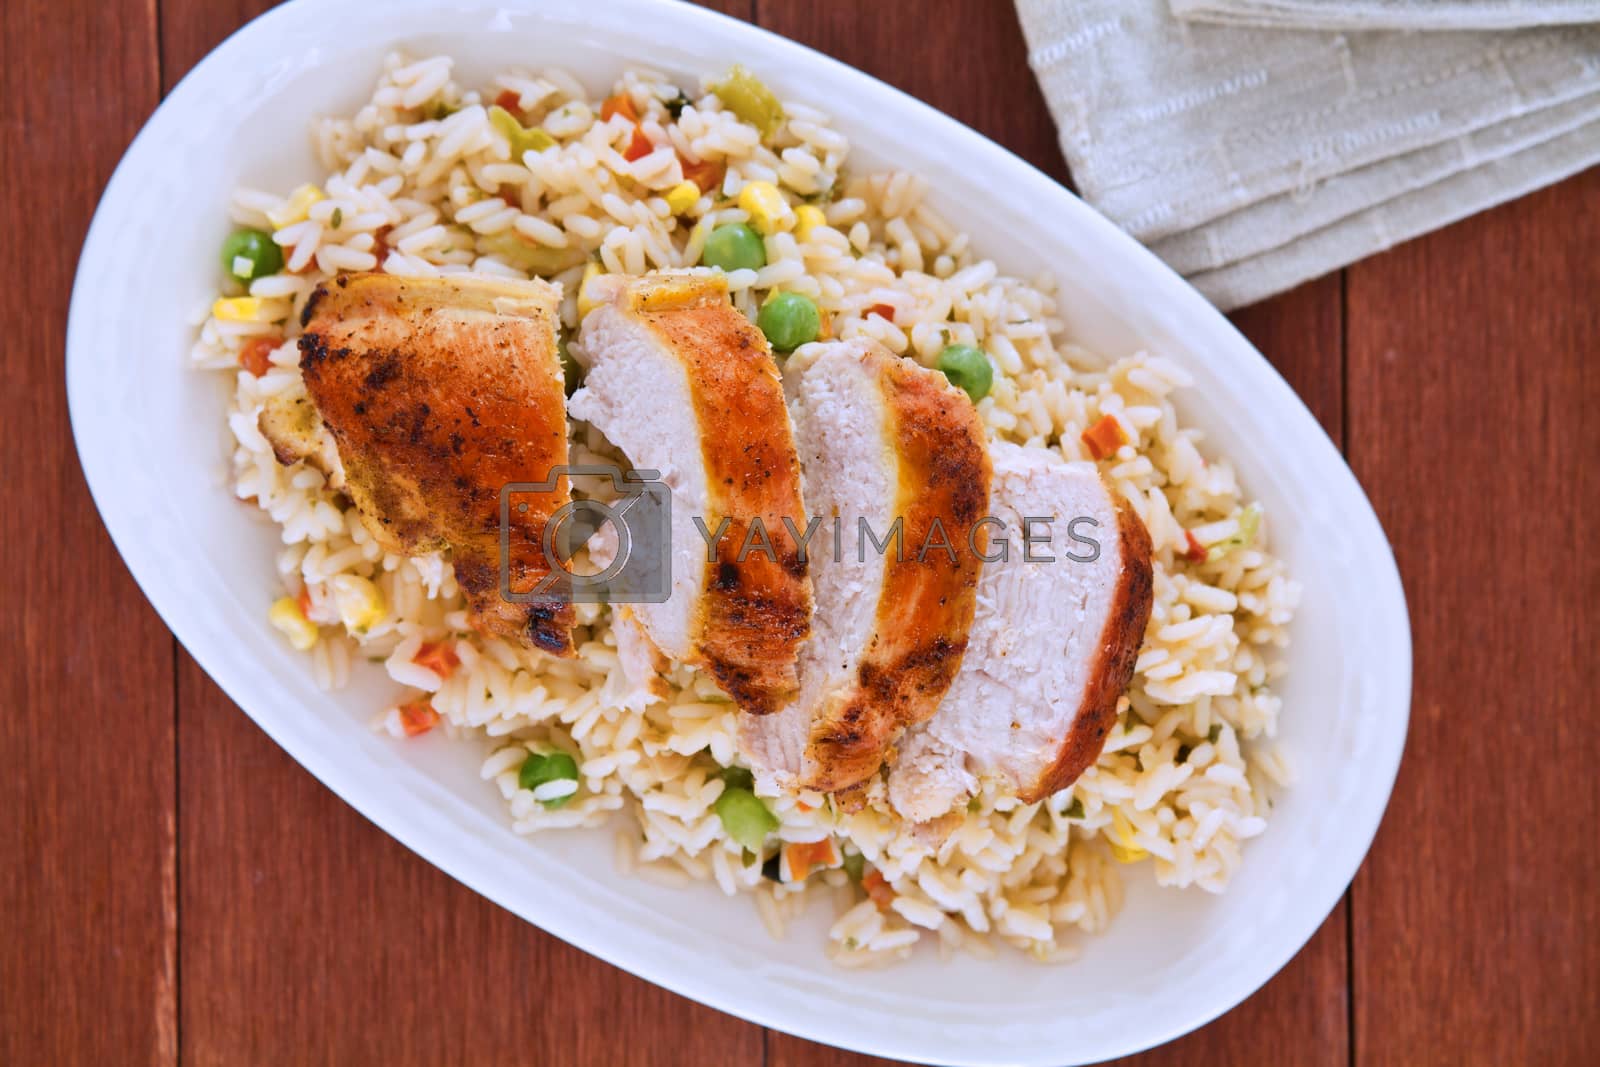 Royalty free image of Chicken Breast Meal by mpessaris